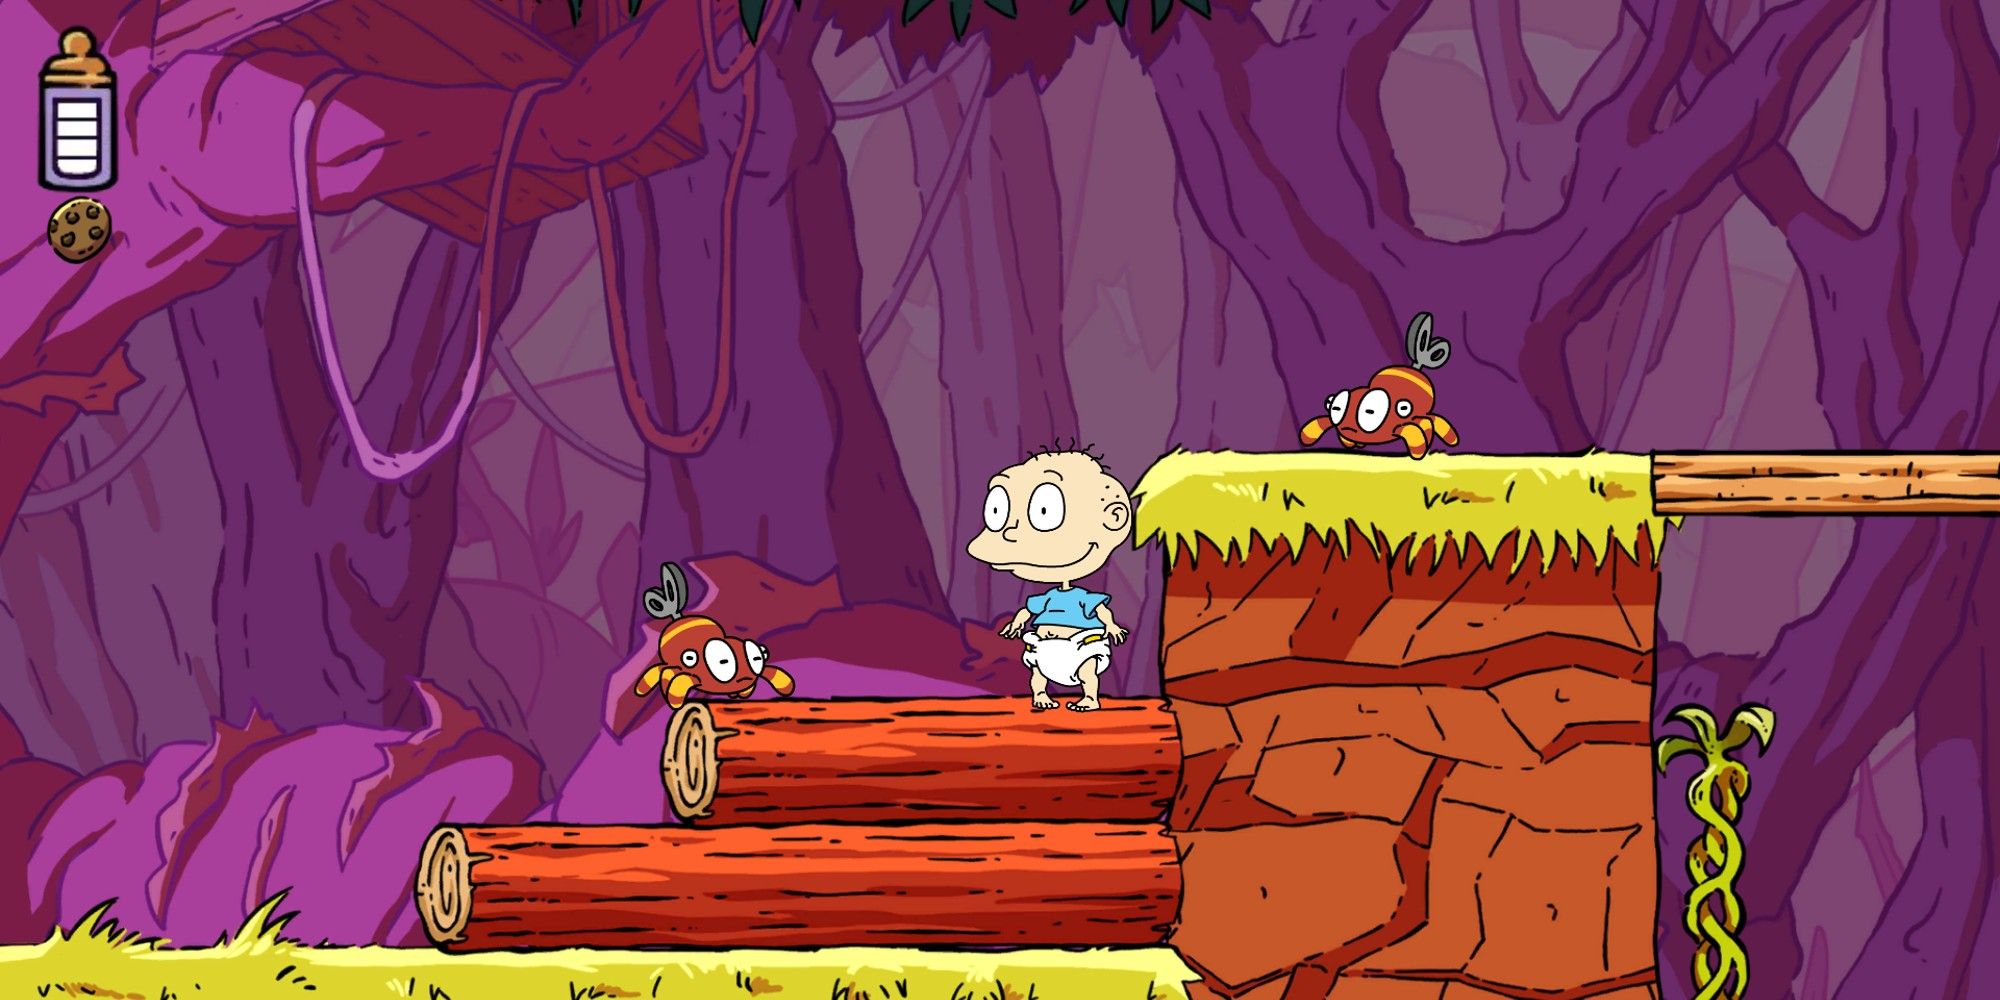 Rugrats Adventures in Gameland with Tommy in a jungle setting with fallen logs and vines